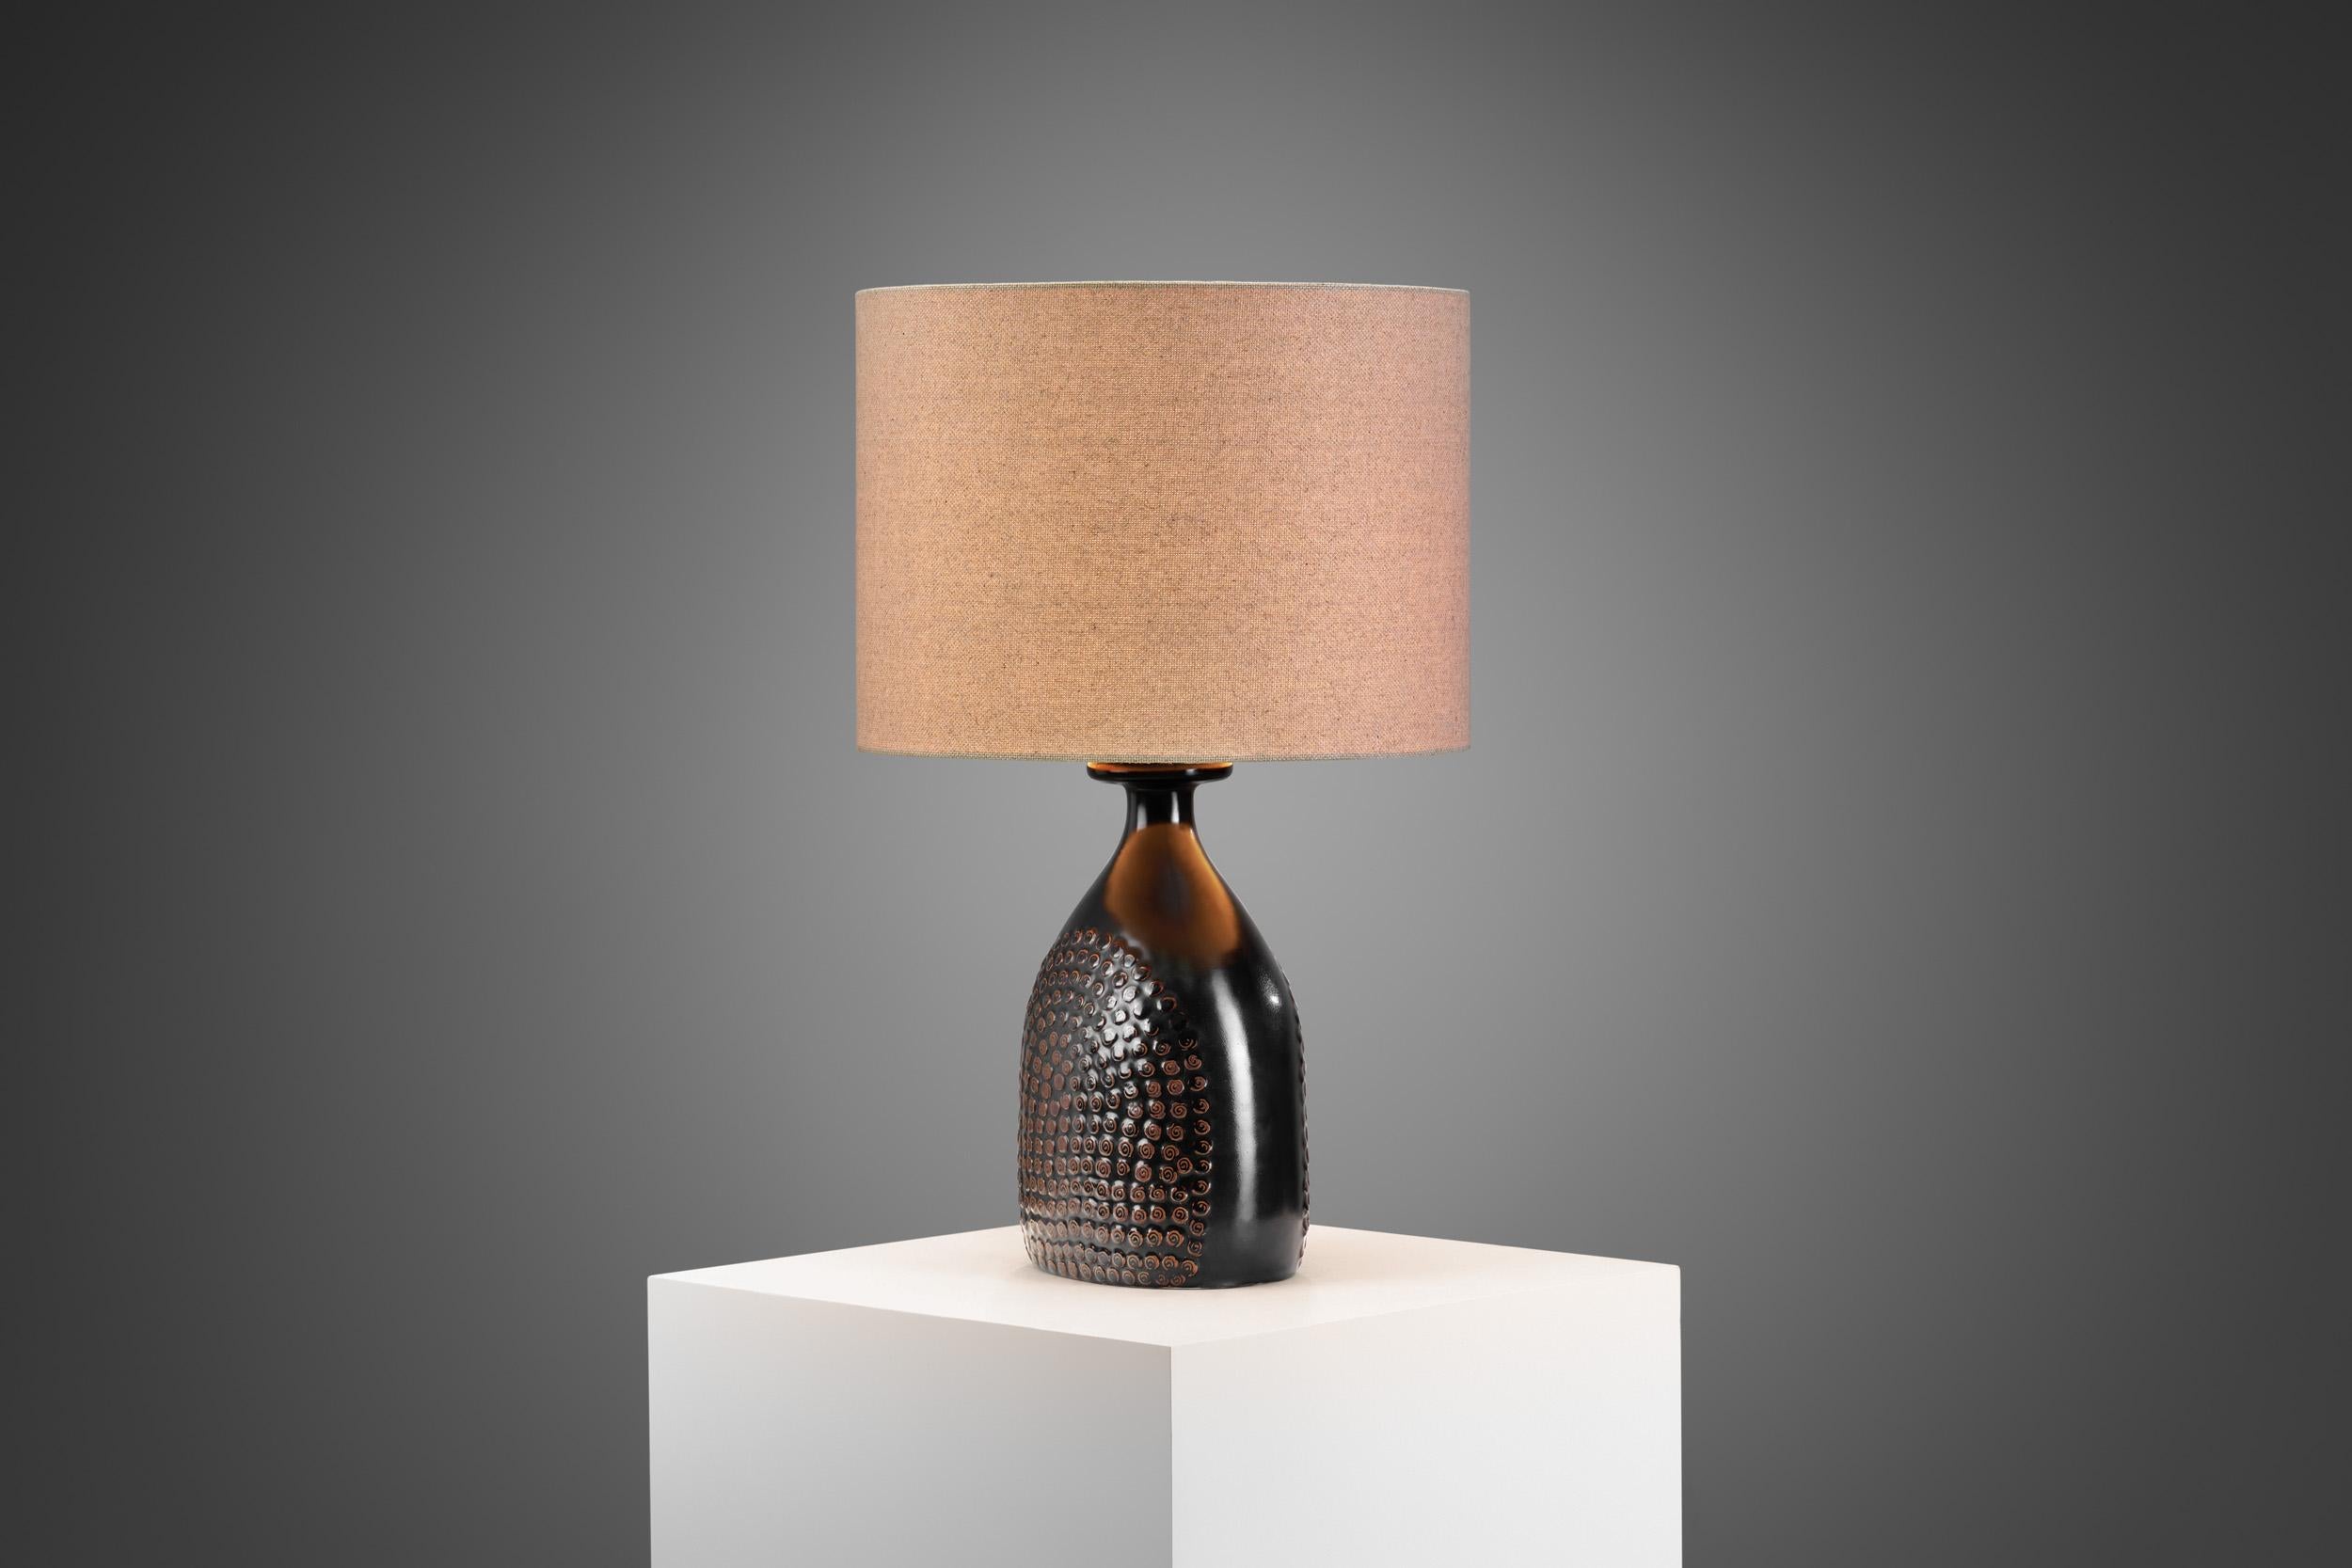 Mid-Century Modern Stig Lindberg Stoneware Table Lamp with Fabric Shade, Sweden 1960s For Sale